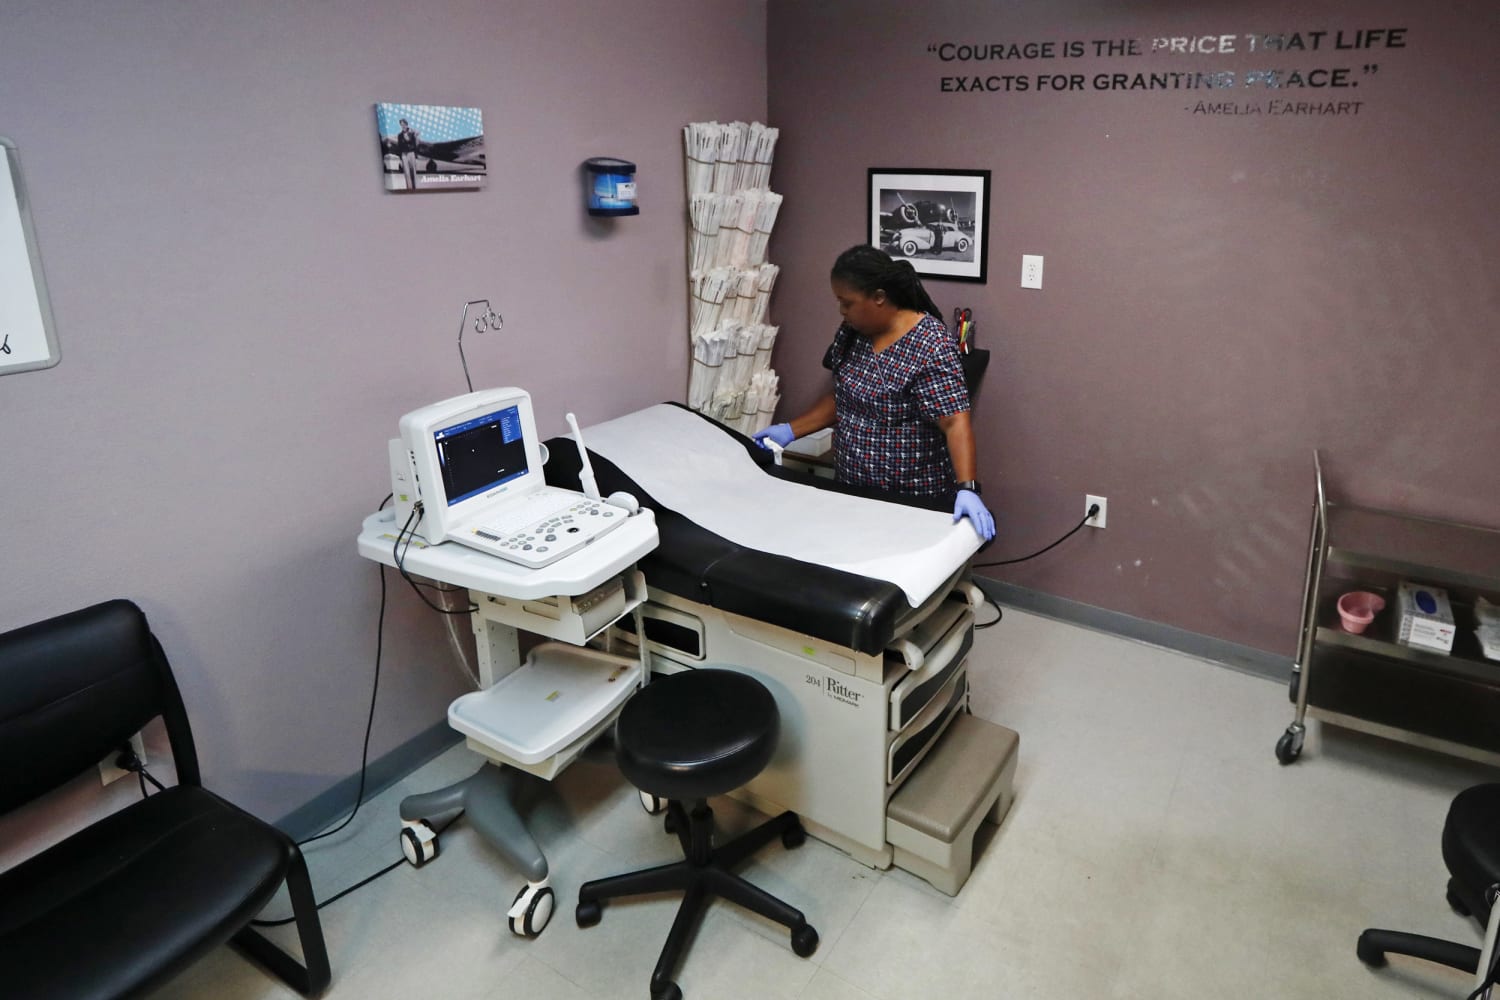 Texas abortion clinics are ‘frozen in time’ under new restrictive law